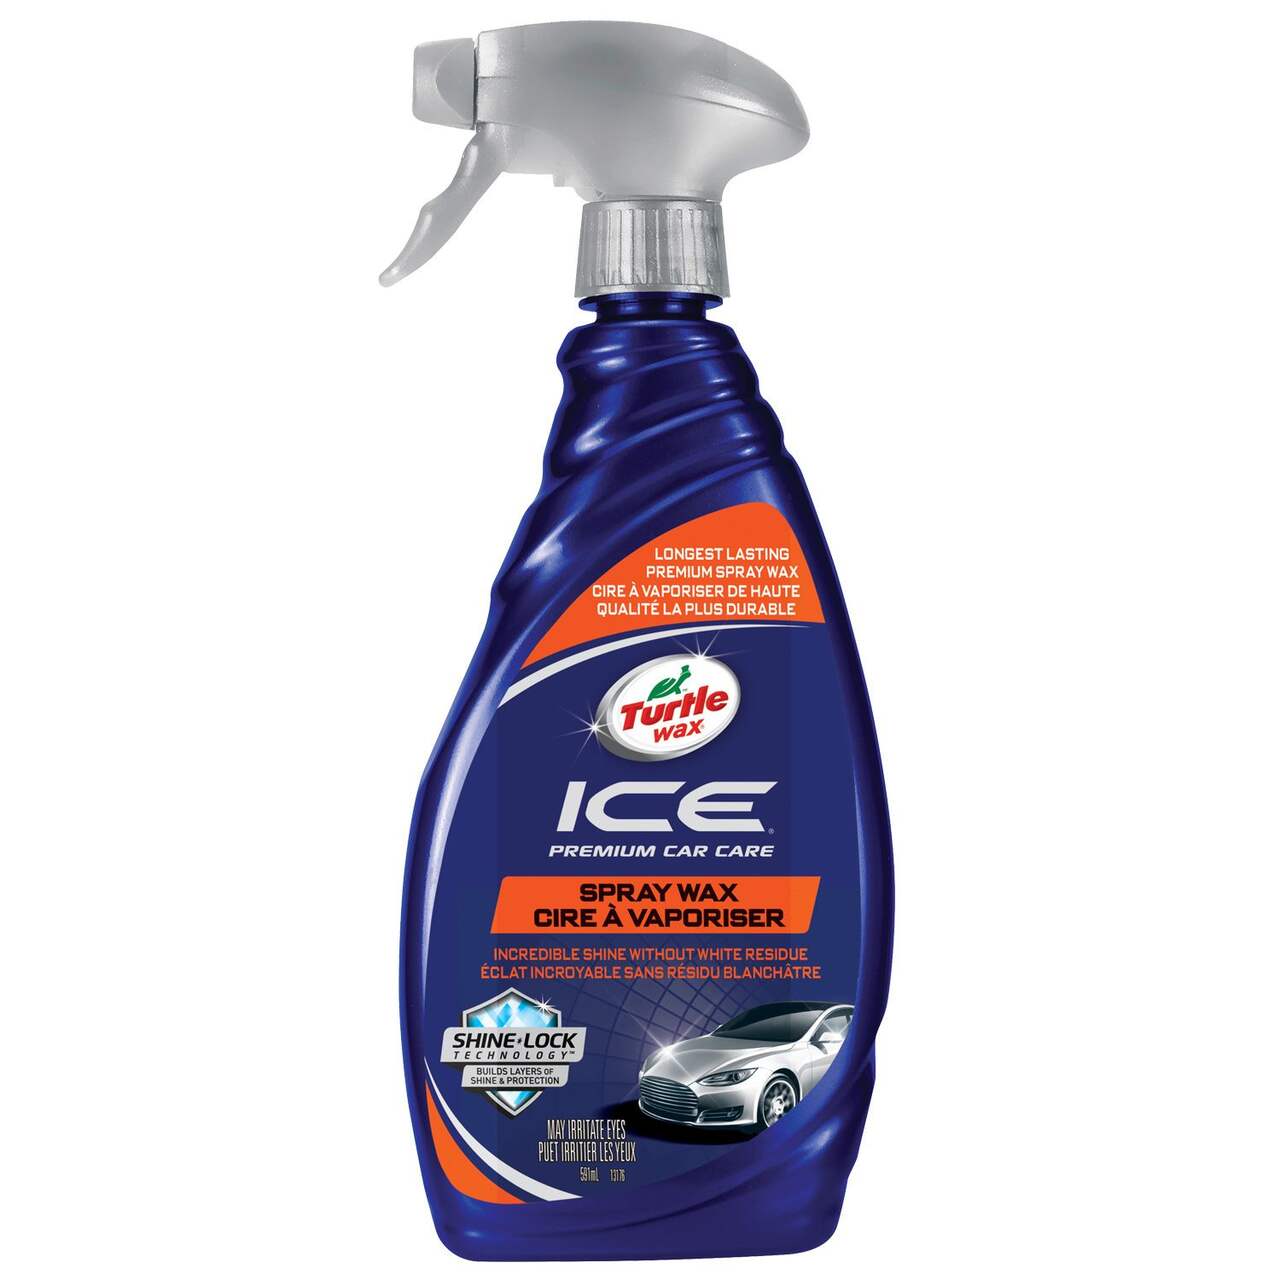 https://media-www.canadiantire.ca/product/automotive/car-care-accessories/auto-cleaning-chemicals/0390448/turtle-wax-ice-spray-wax-23oz--53f376be-1a80-4202-af93-f2b386afb441-jpgrendition.jpg?imdensity=1&imwidth=640&impolicy=mZoom